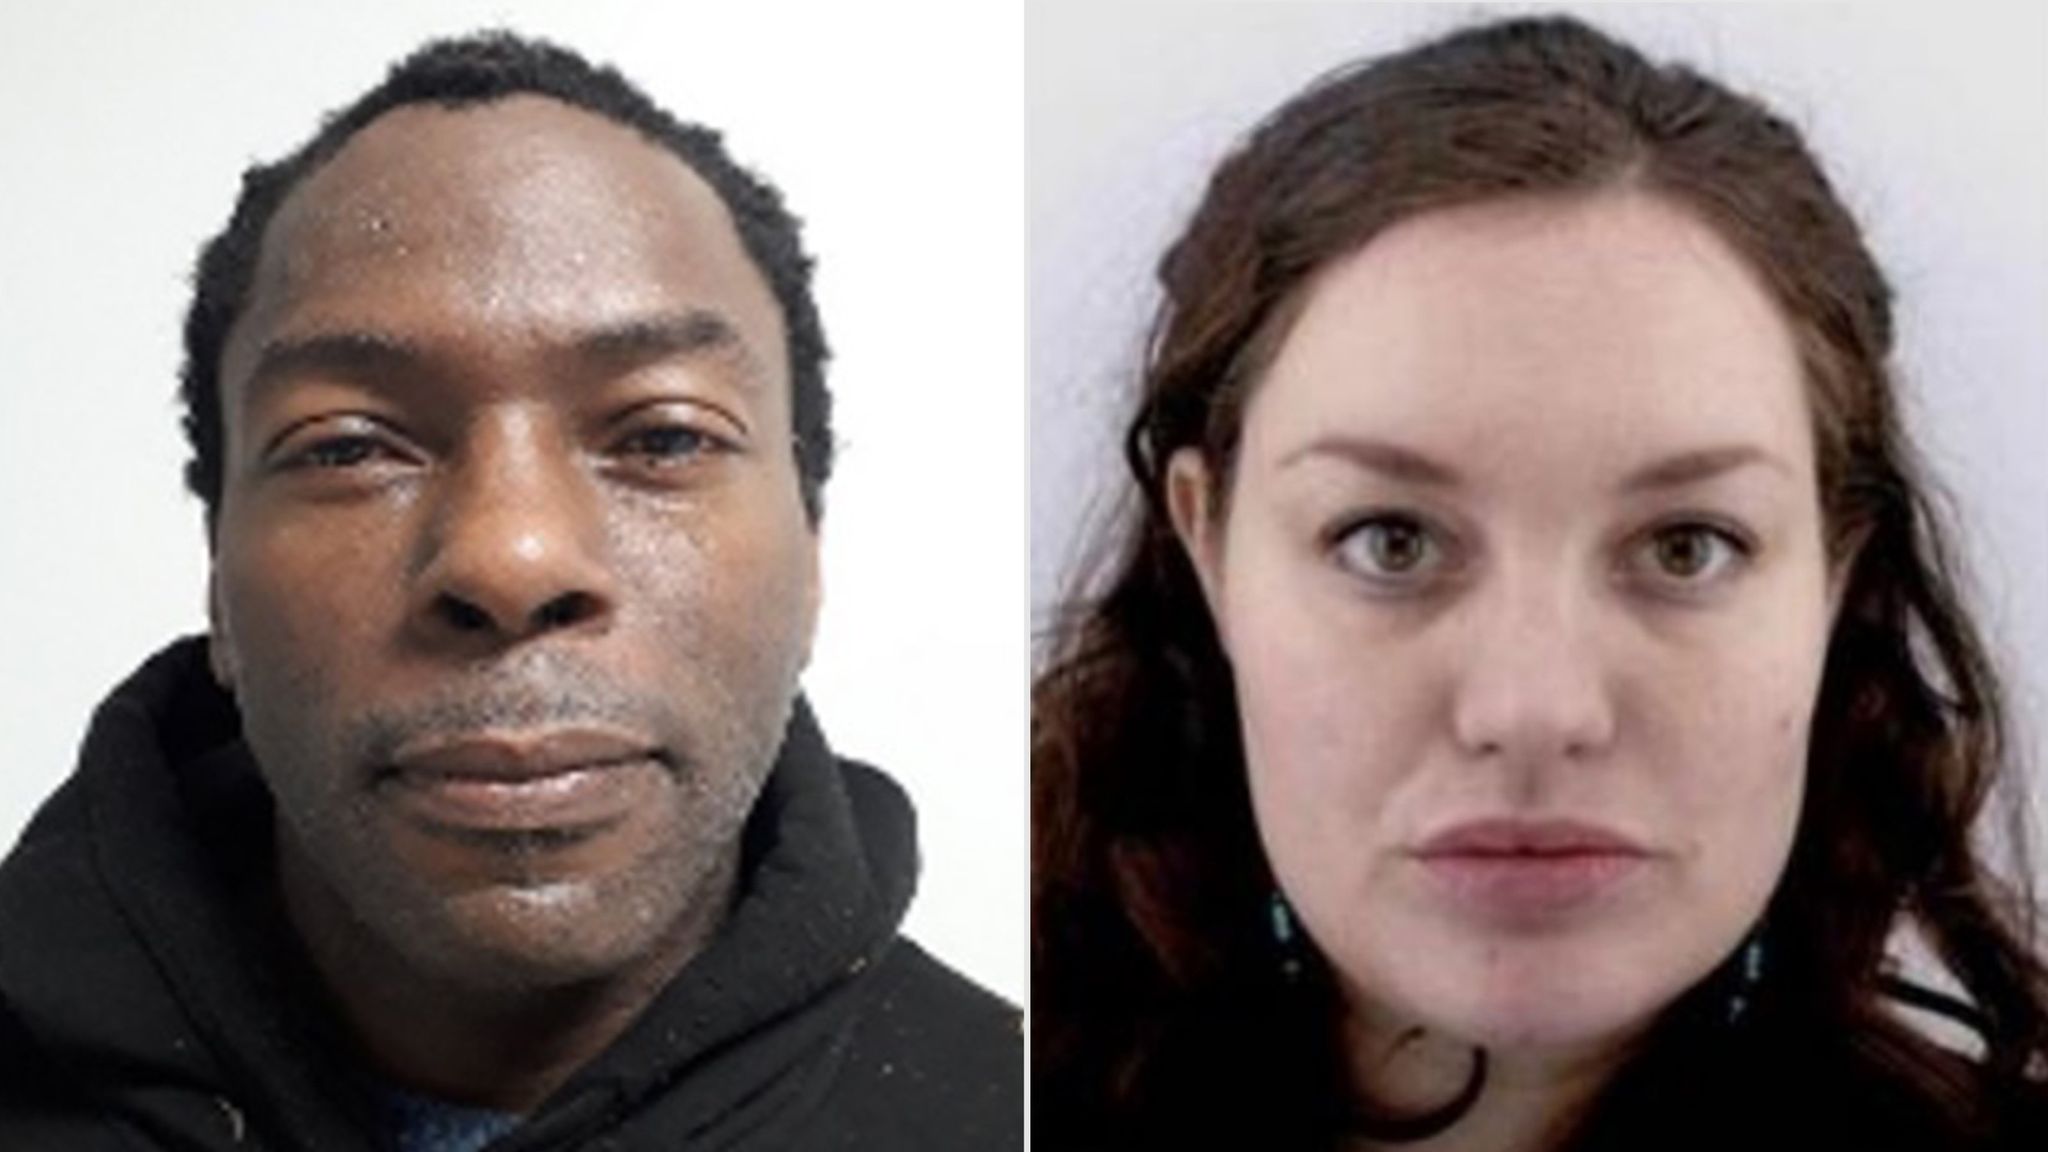 Constance Marten and Mark Gordon’s baby ‘dead for several weeks’ before discovery, say police 1